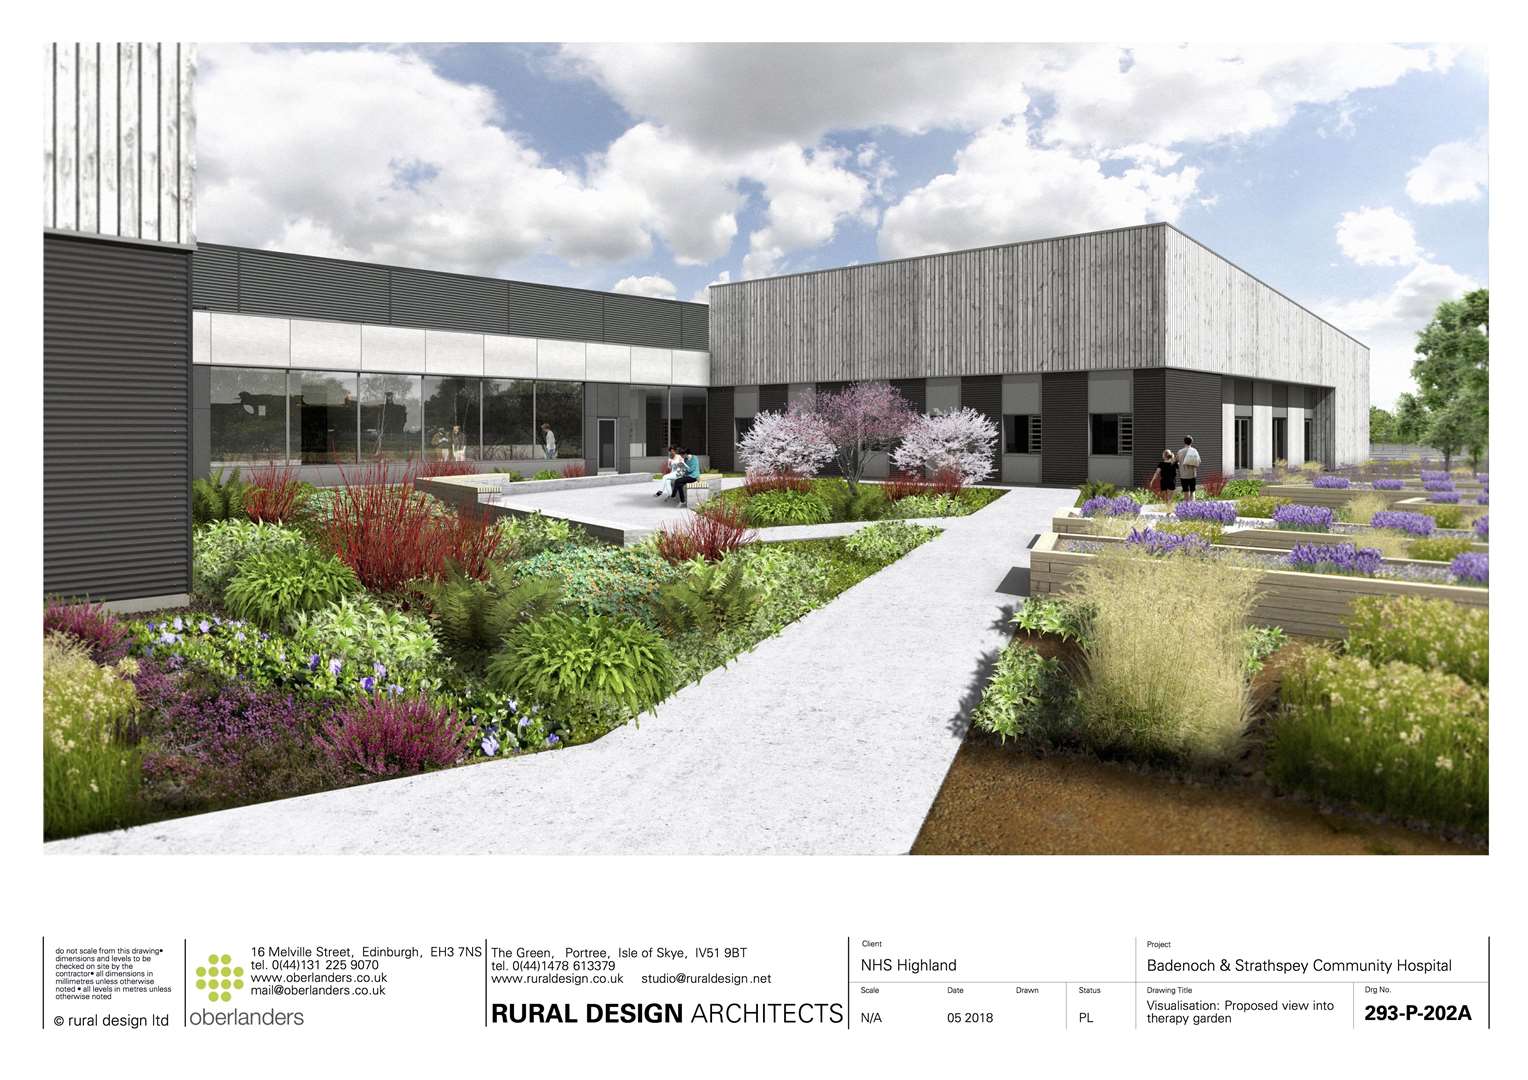 The therapy garden at the new hospital to be built in Aviemore